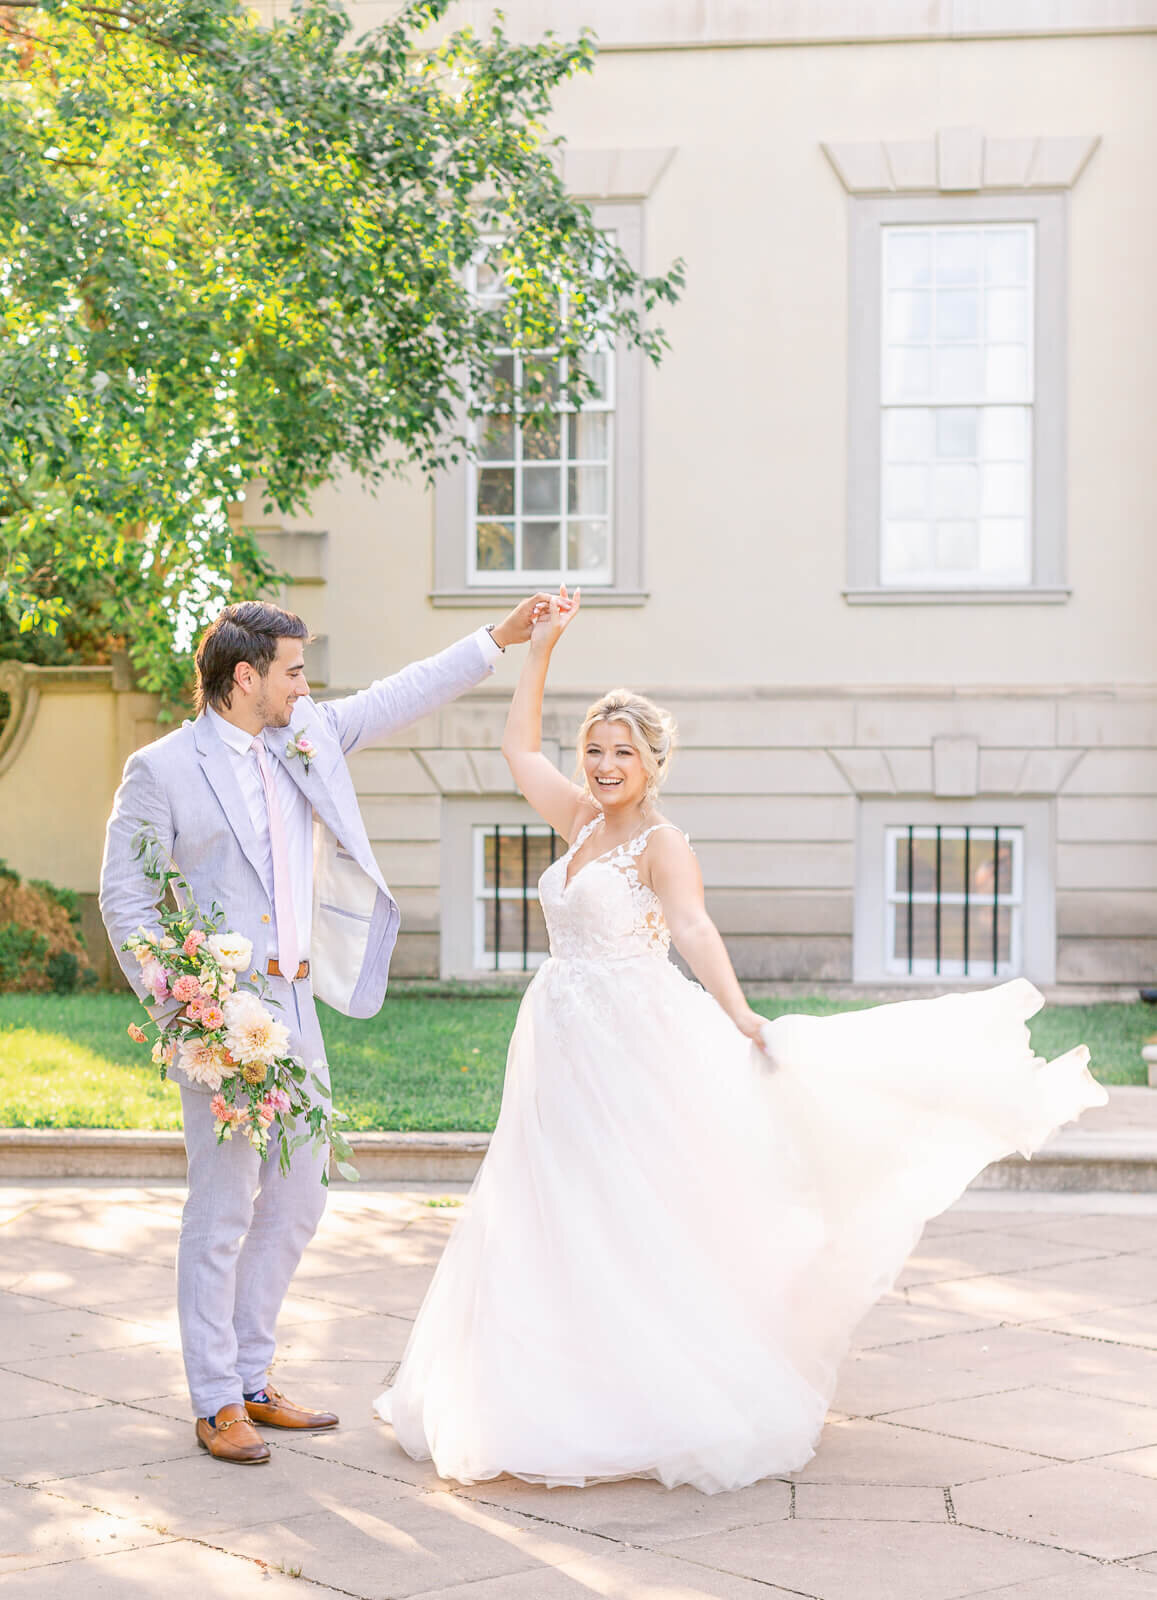 Groom twirling bride at Great Marsh Estate. Taken by Bethany Aubre Photography.